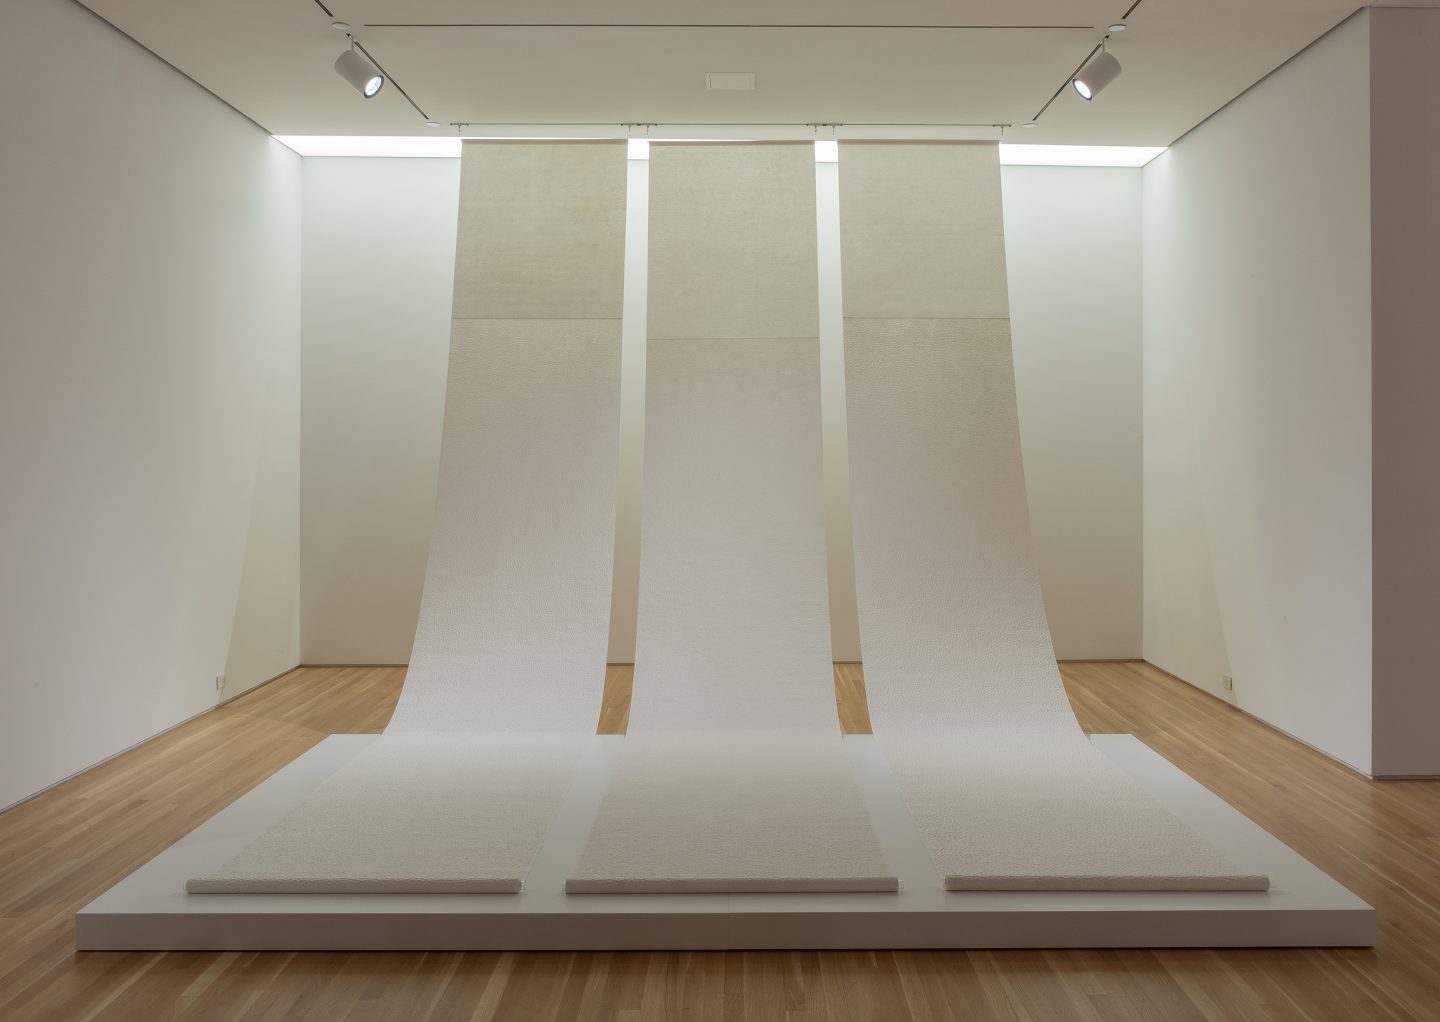 Zhang Yu, Fingerprints, 2008. Installation view, The Allure of Matter: Material Art from China, Wrightwood 659.